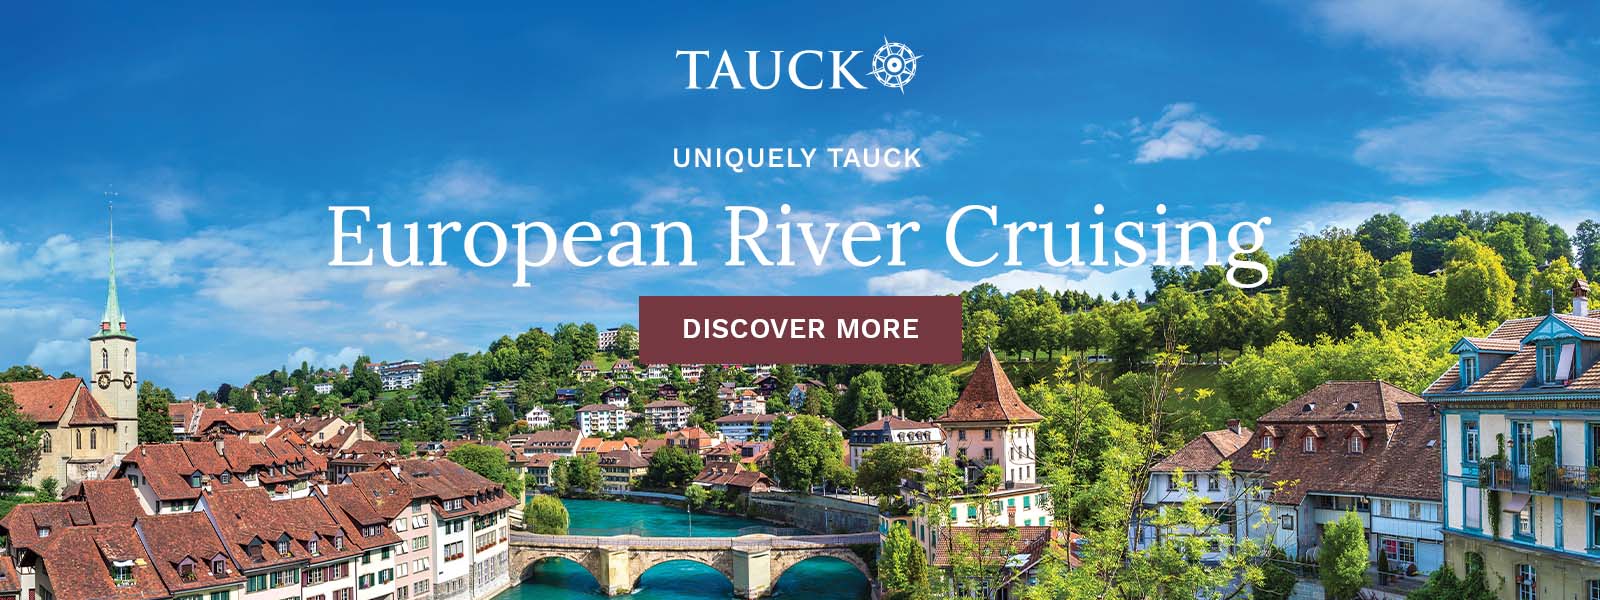 Tauck River Cruise Promotions